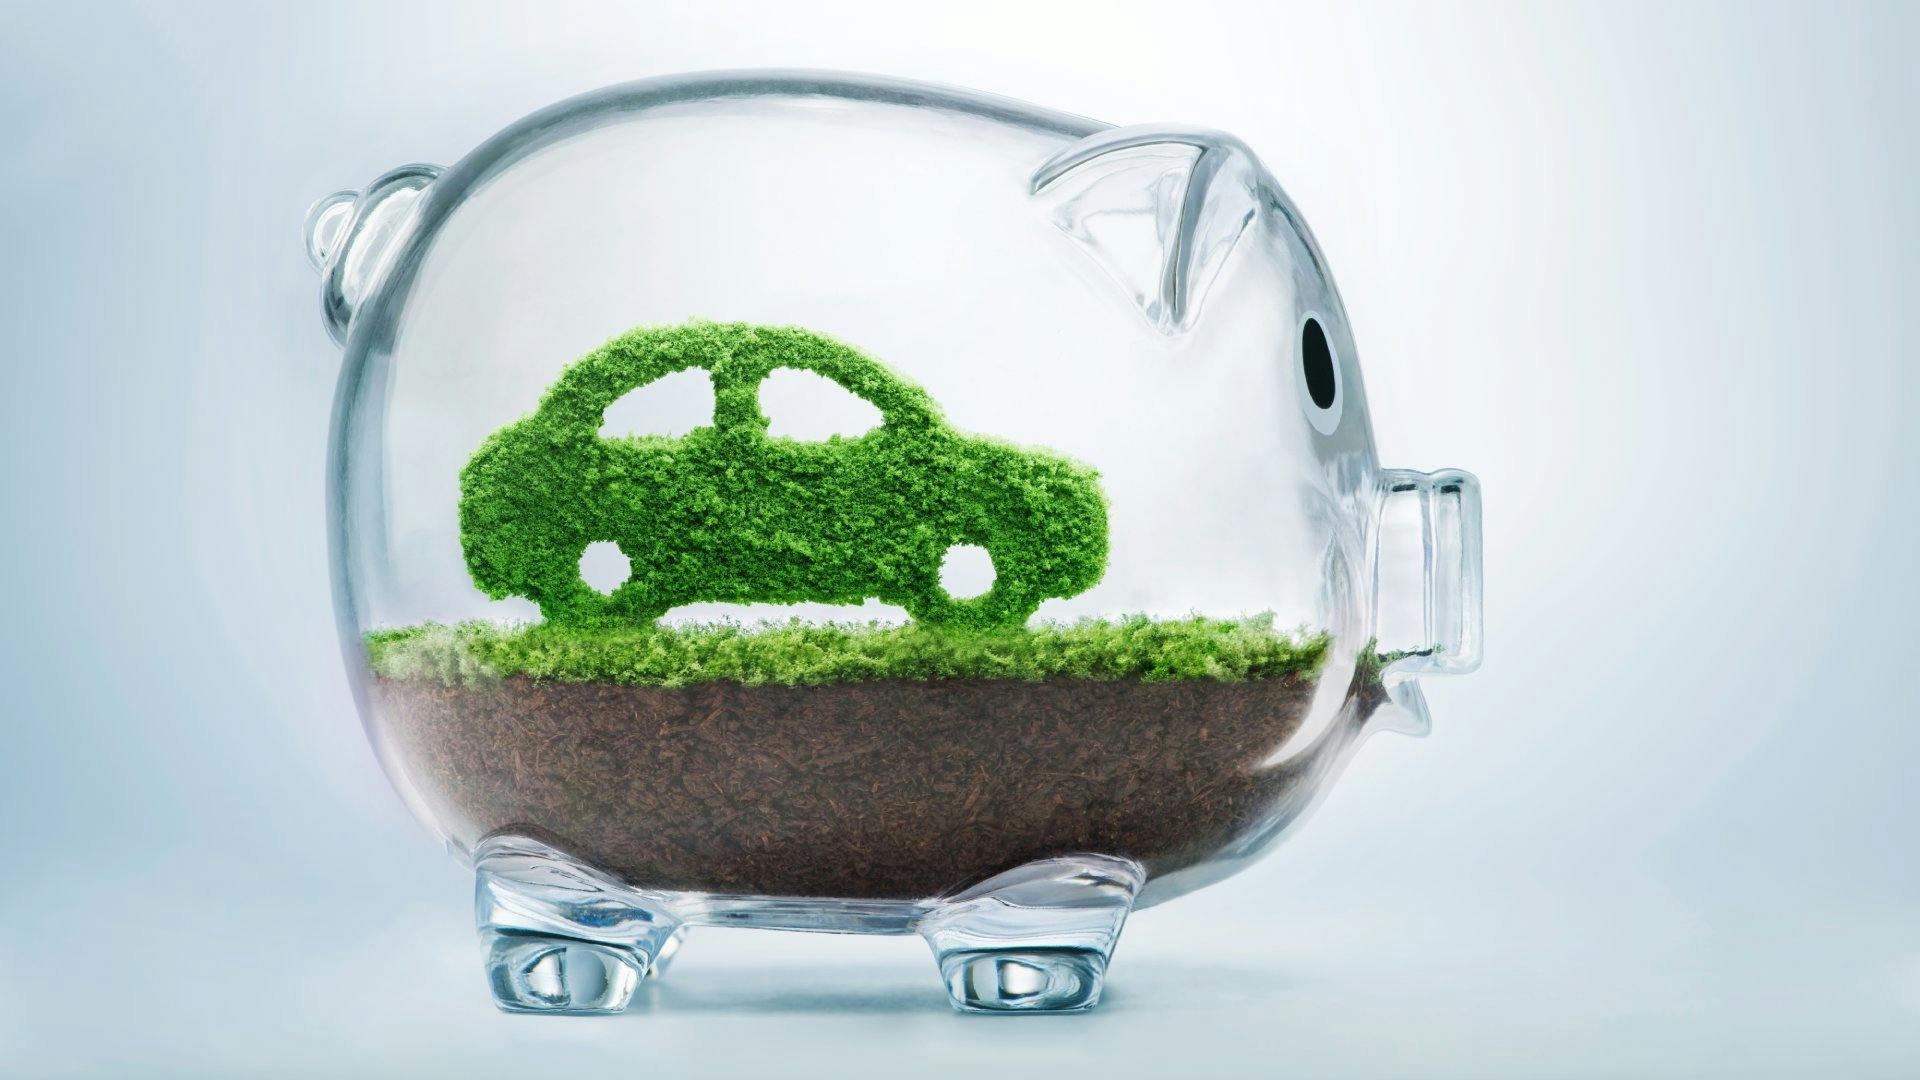 A glass piggy bank with soil, grass, and a hedge in the shape of a car